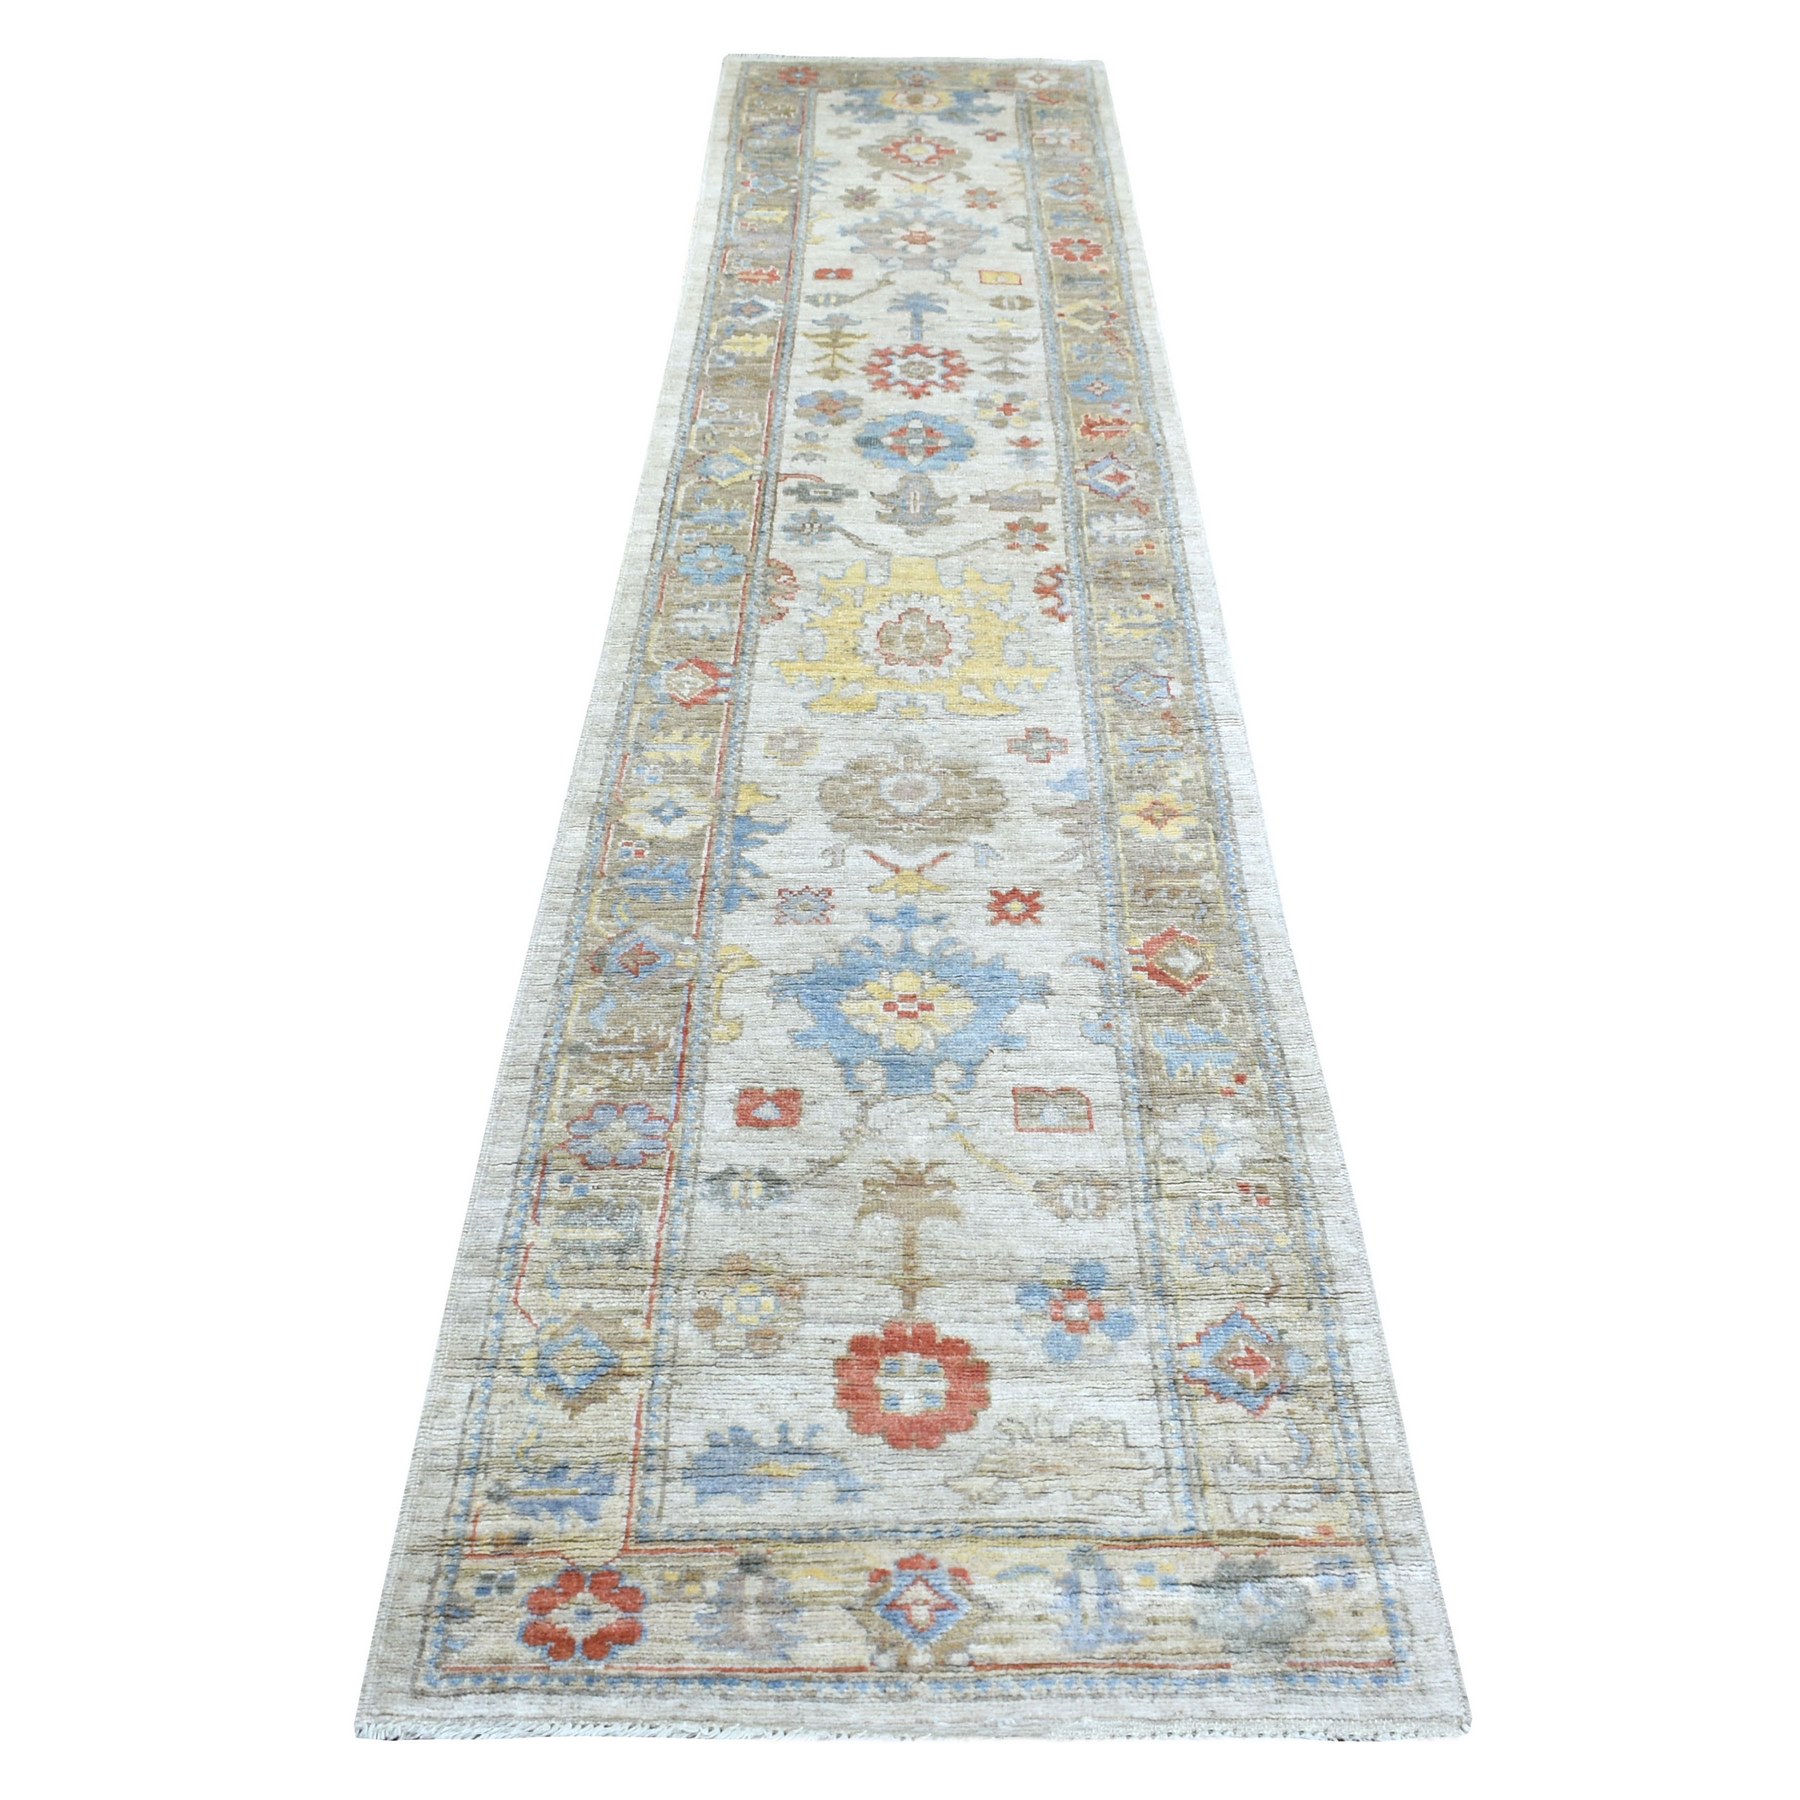 2'7"x12'2" Hand Woven Gray Afghan Angora Oushak with Colorful Leaf Design Pliable Wool Oriental Runner Rug 